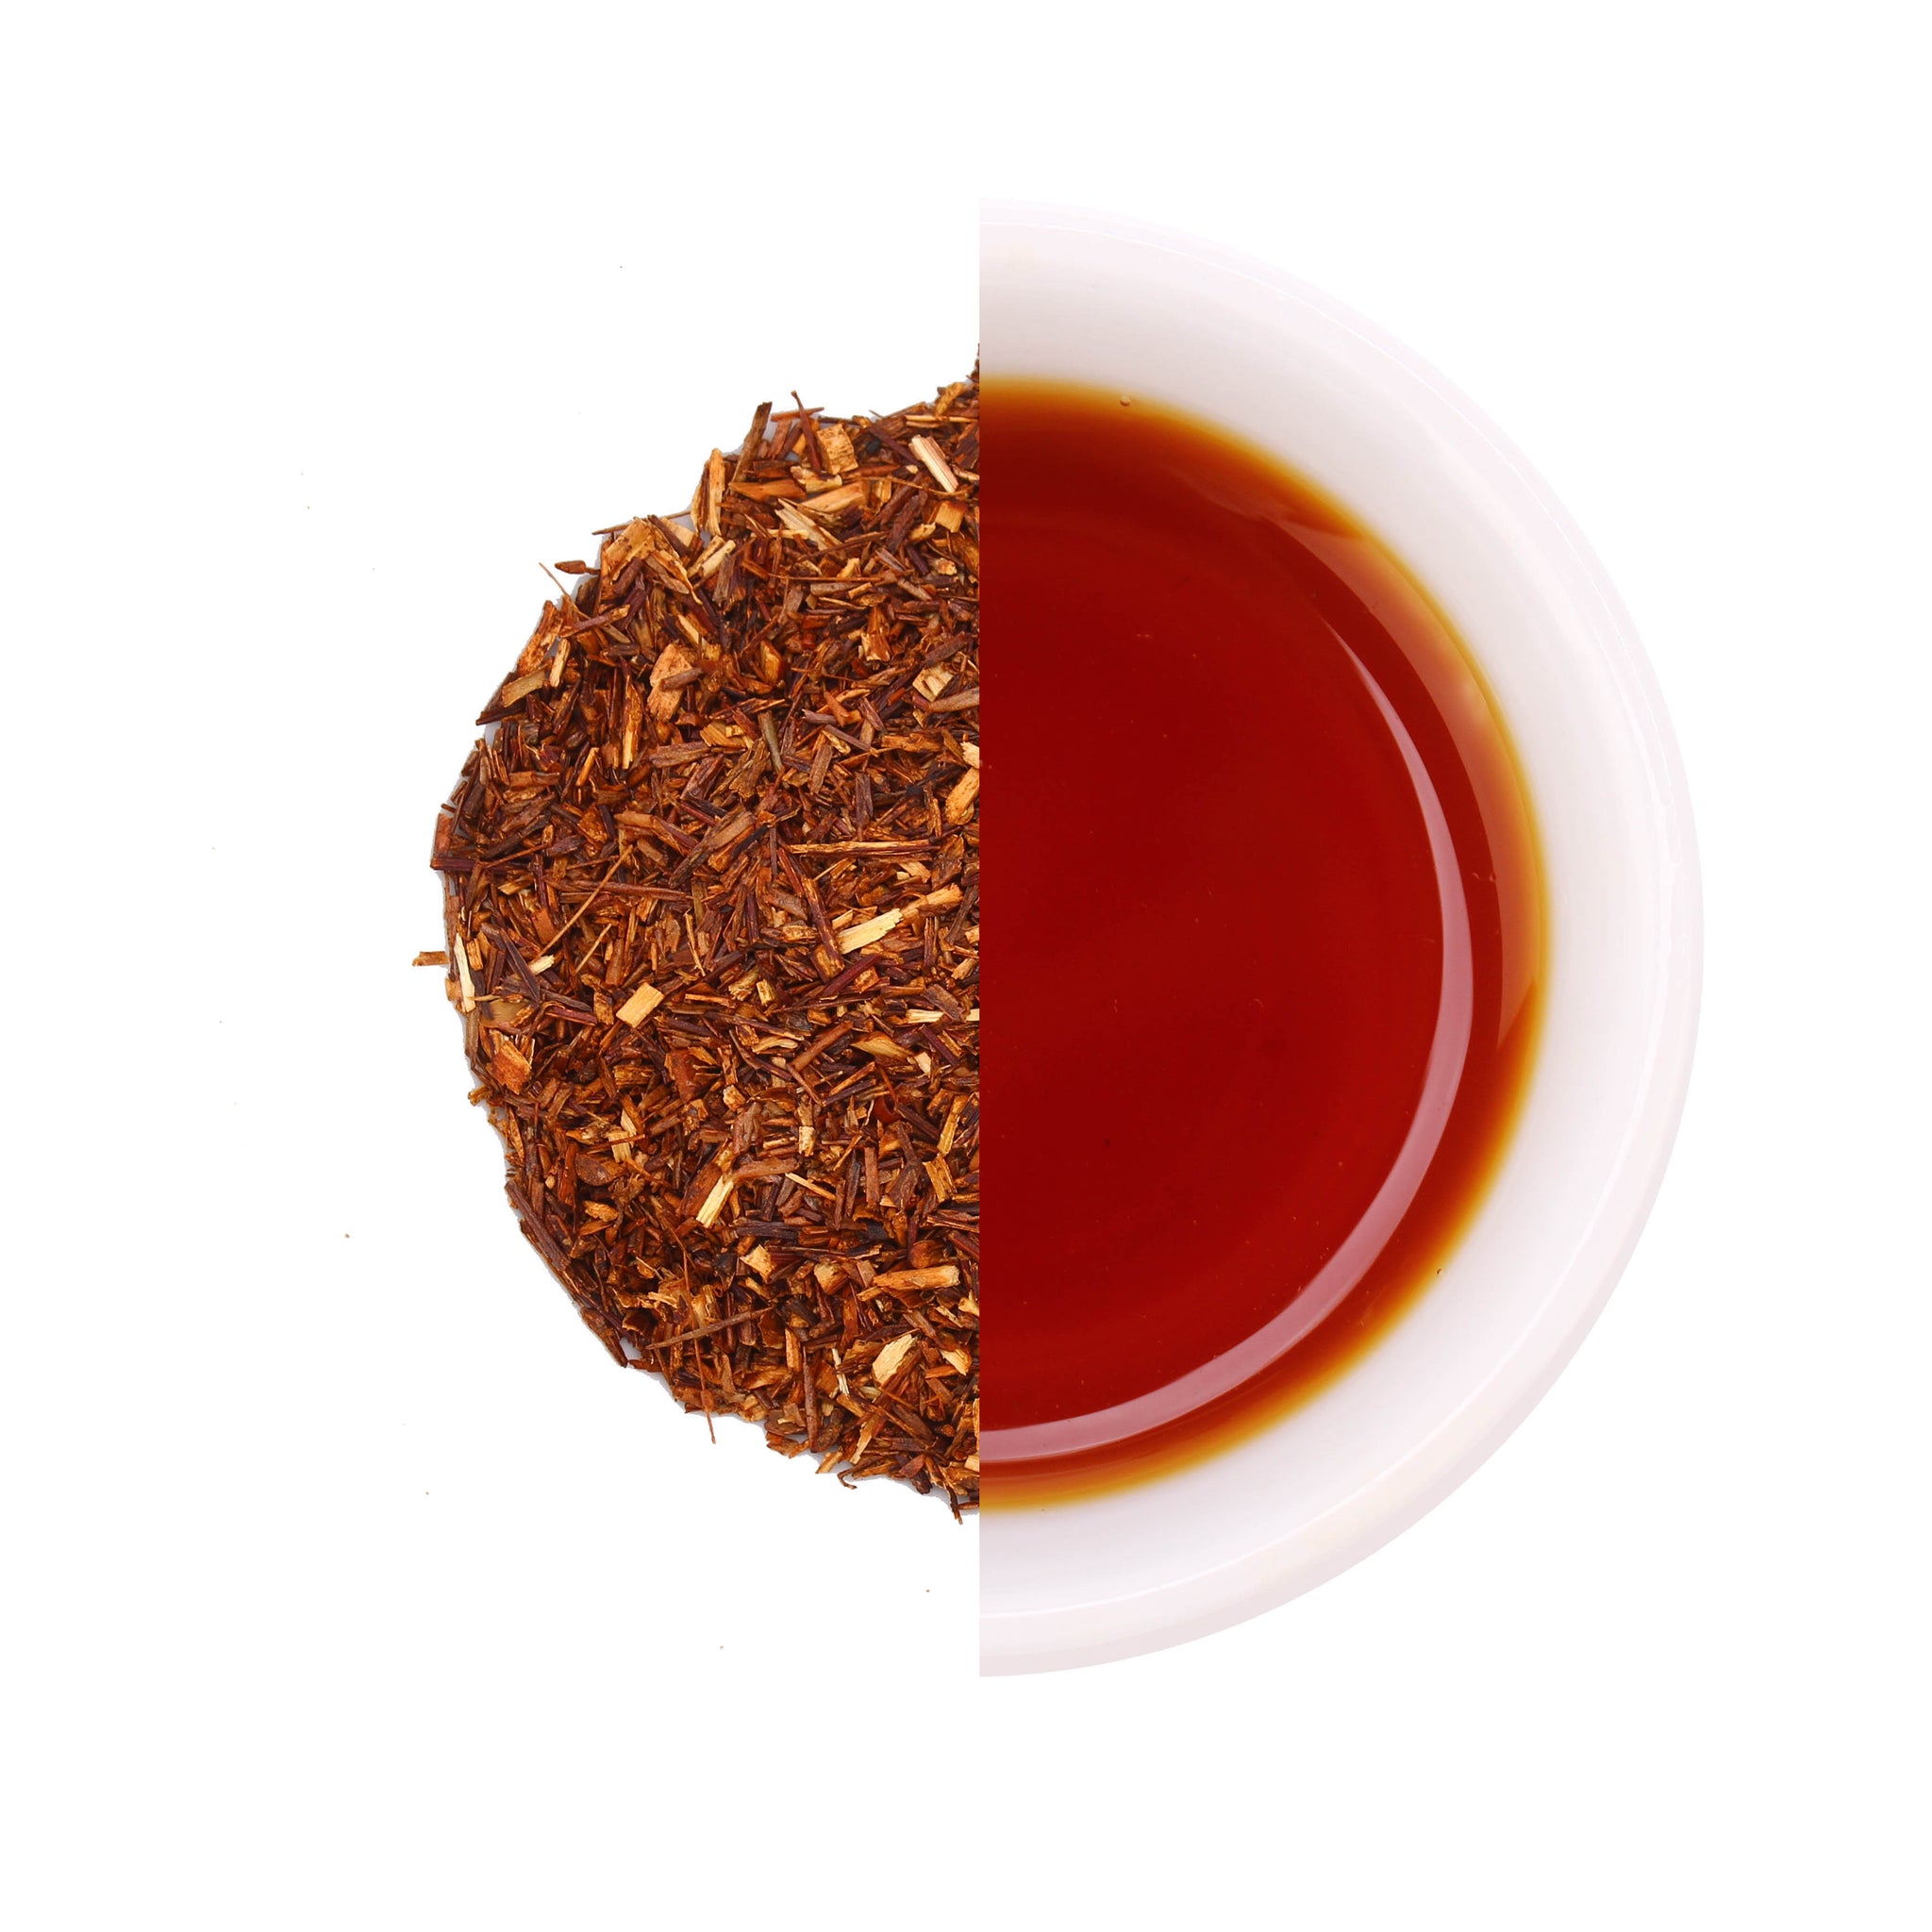 Herbal Tea: A Healthy and Delicious Alternative to Traditional Tea